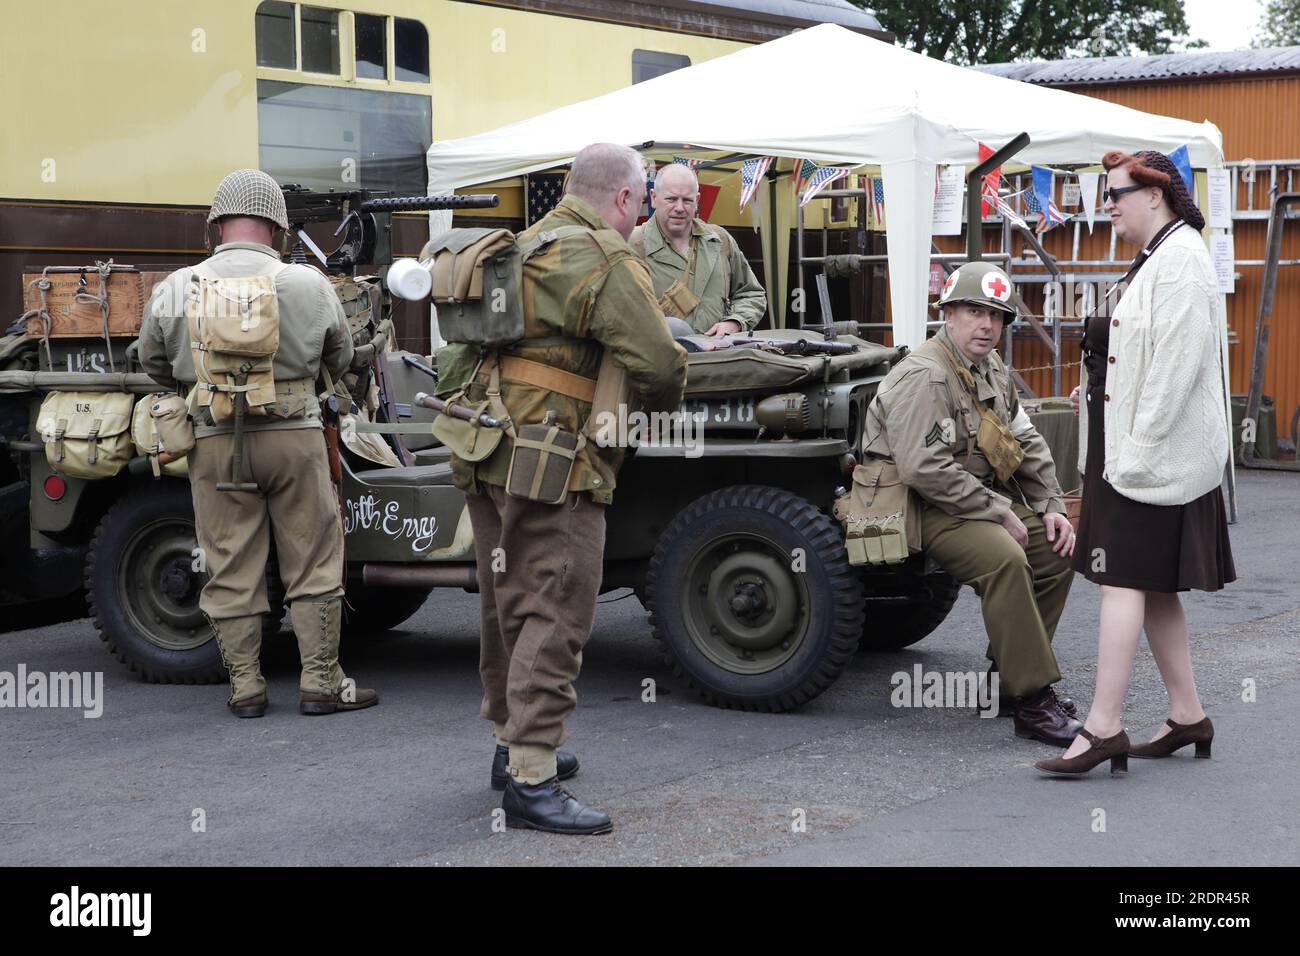 Enthusiasts all dressed up to the nines during the Severn Valley Railway 1940s day. Stock Photo